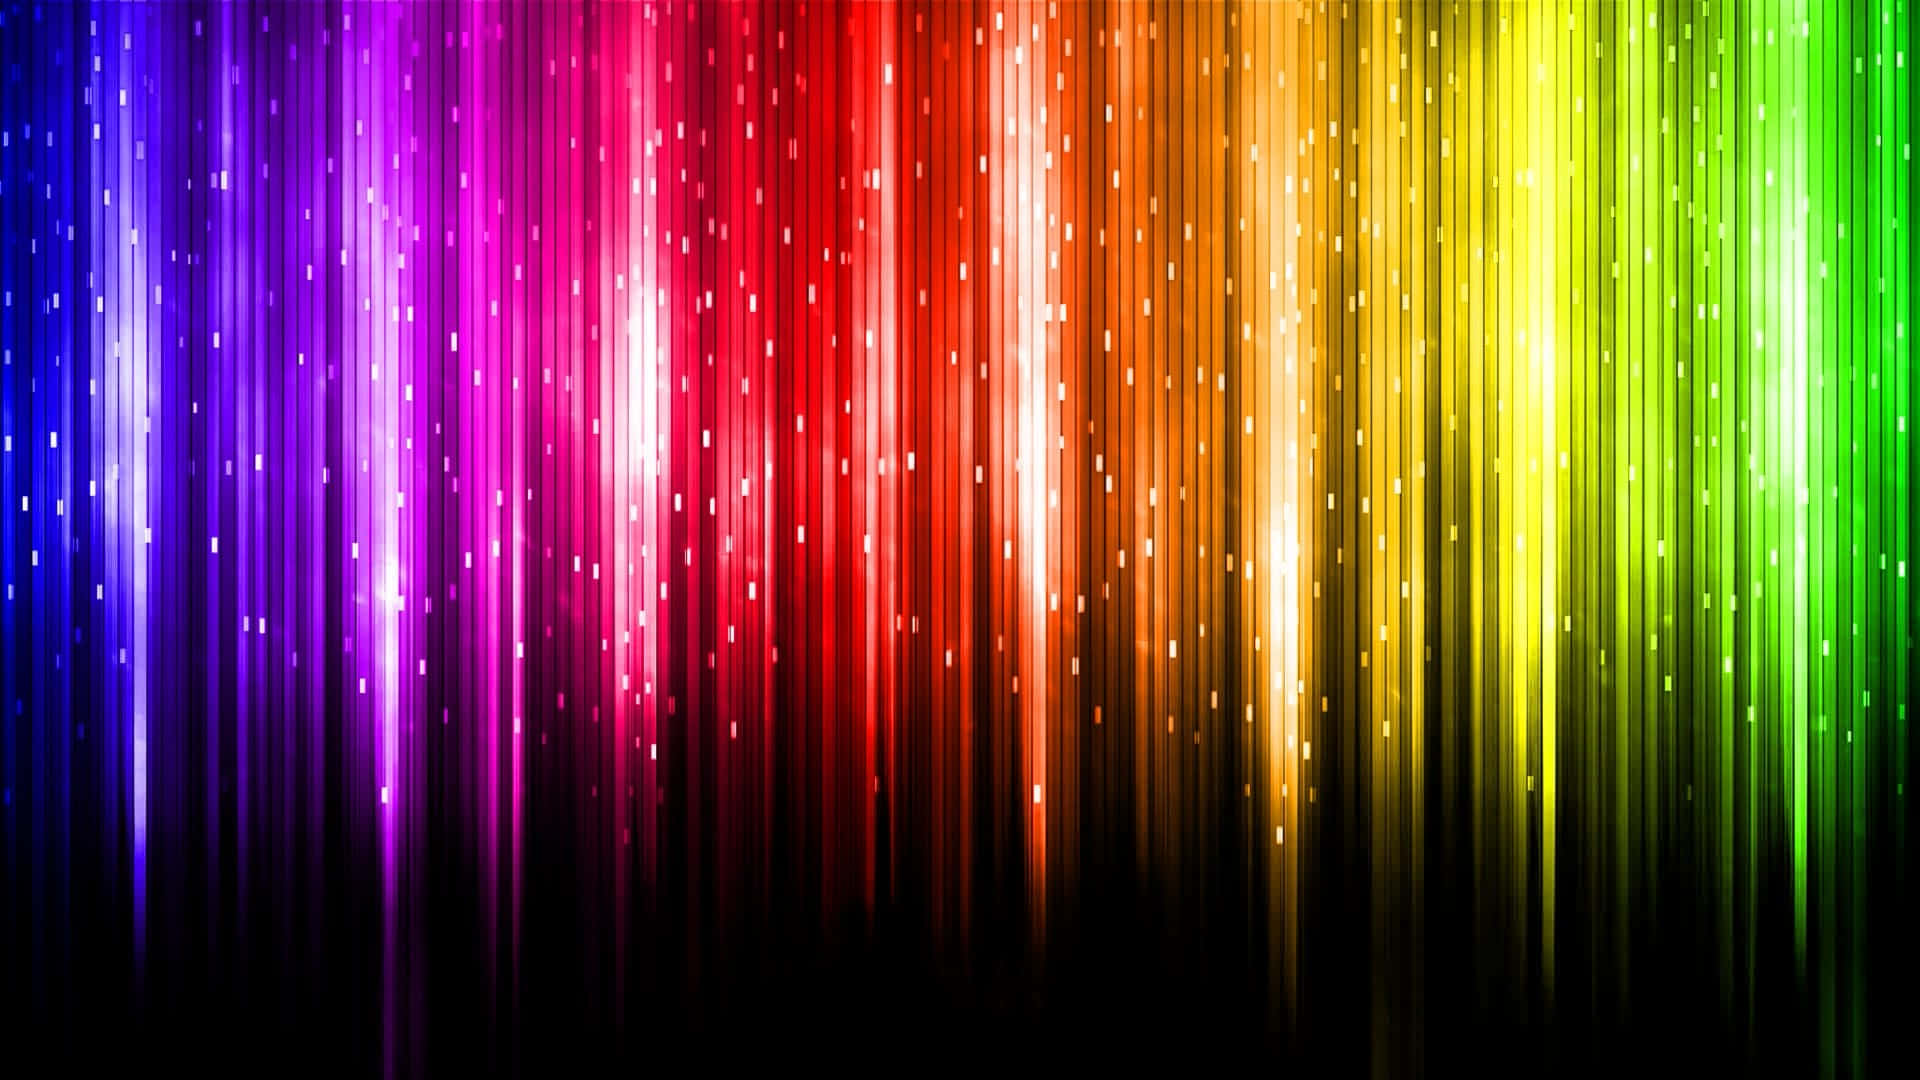 A bright, abstract, colorful background.